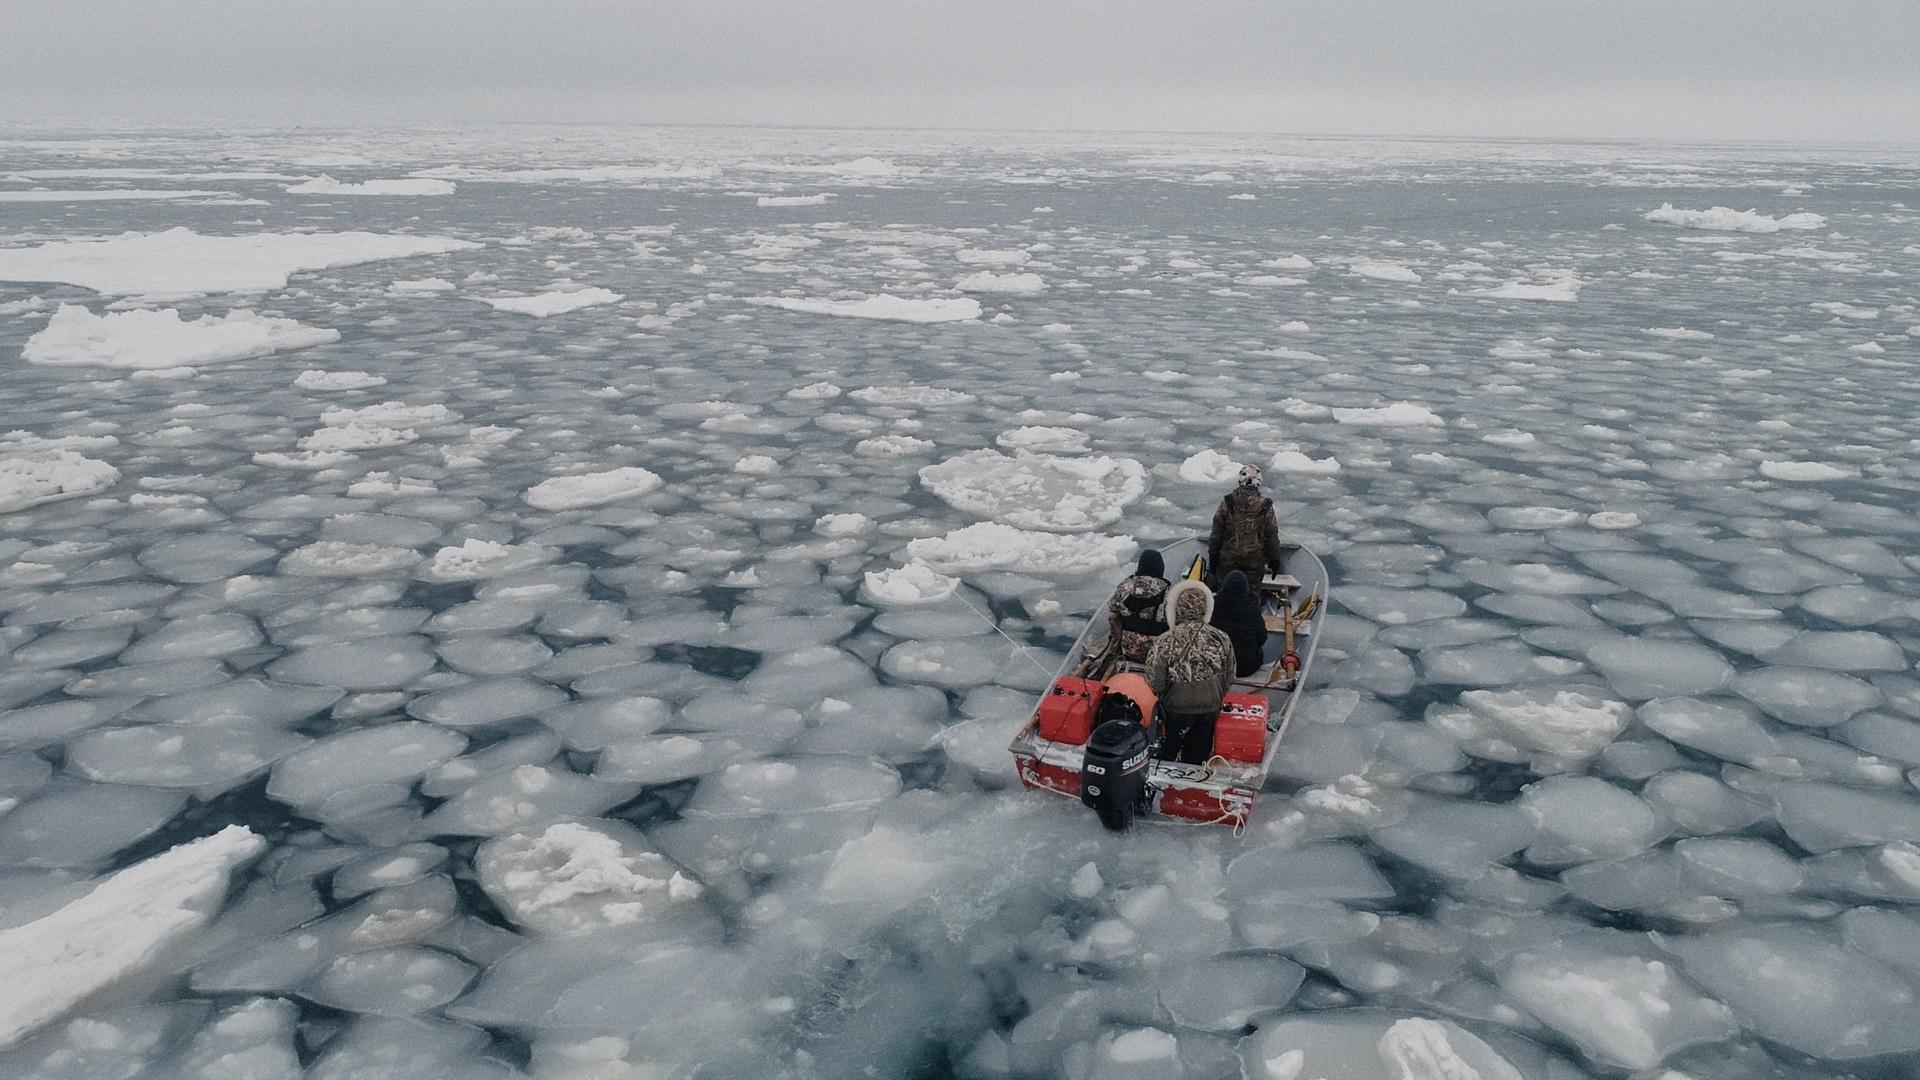 a small aluminum with an outboard motor with 3 people onboard heading out into a frozen ocean with areas of ice barely allowing the boat to pass. The image is from an above angle making the landscape seem emence and the boat seem small